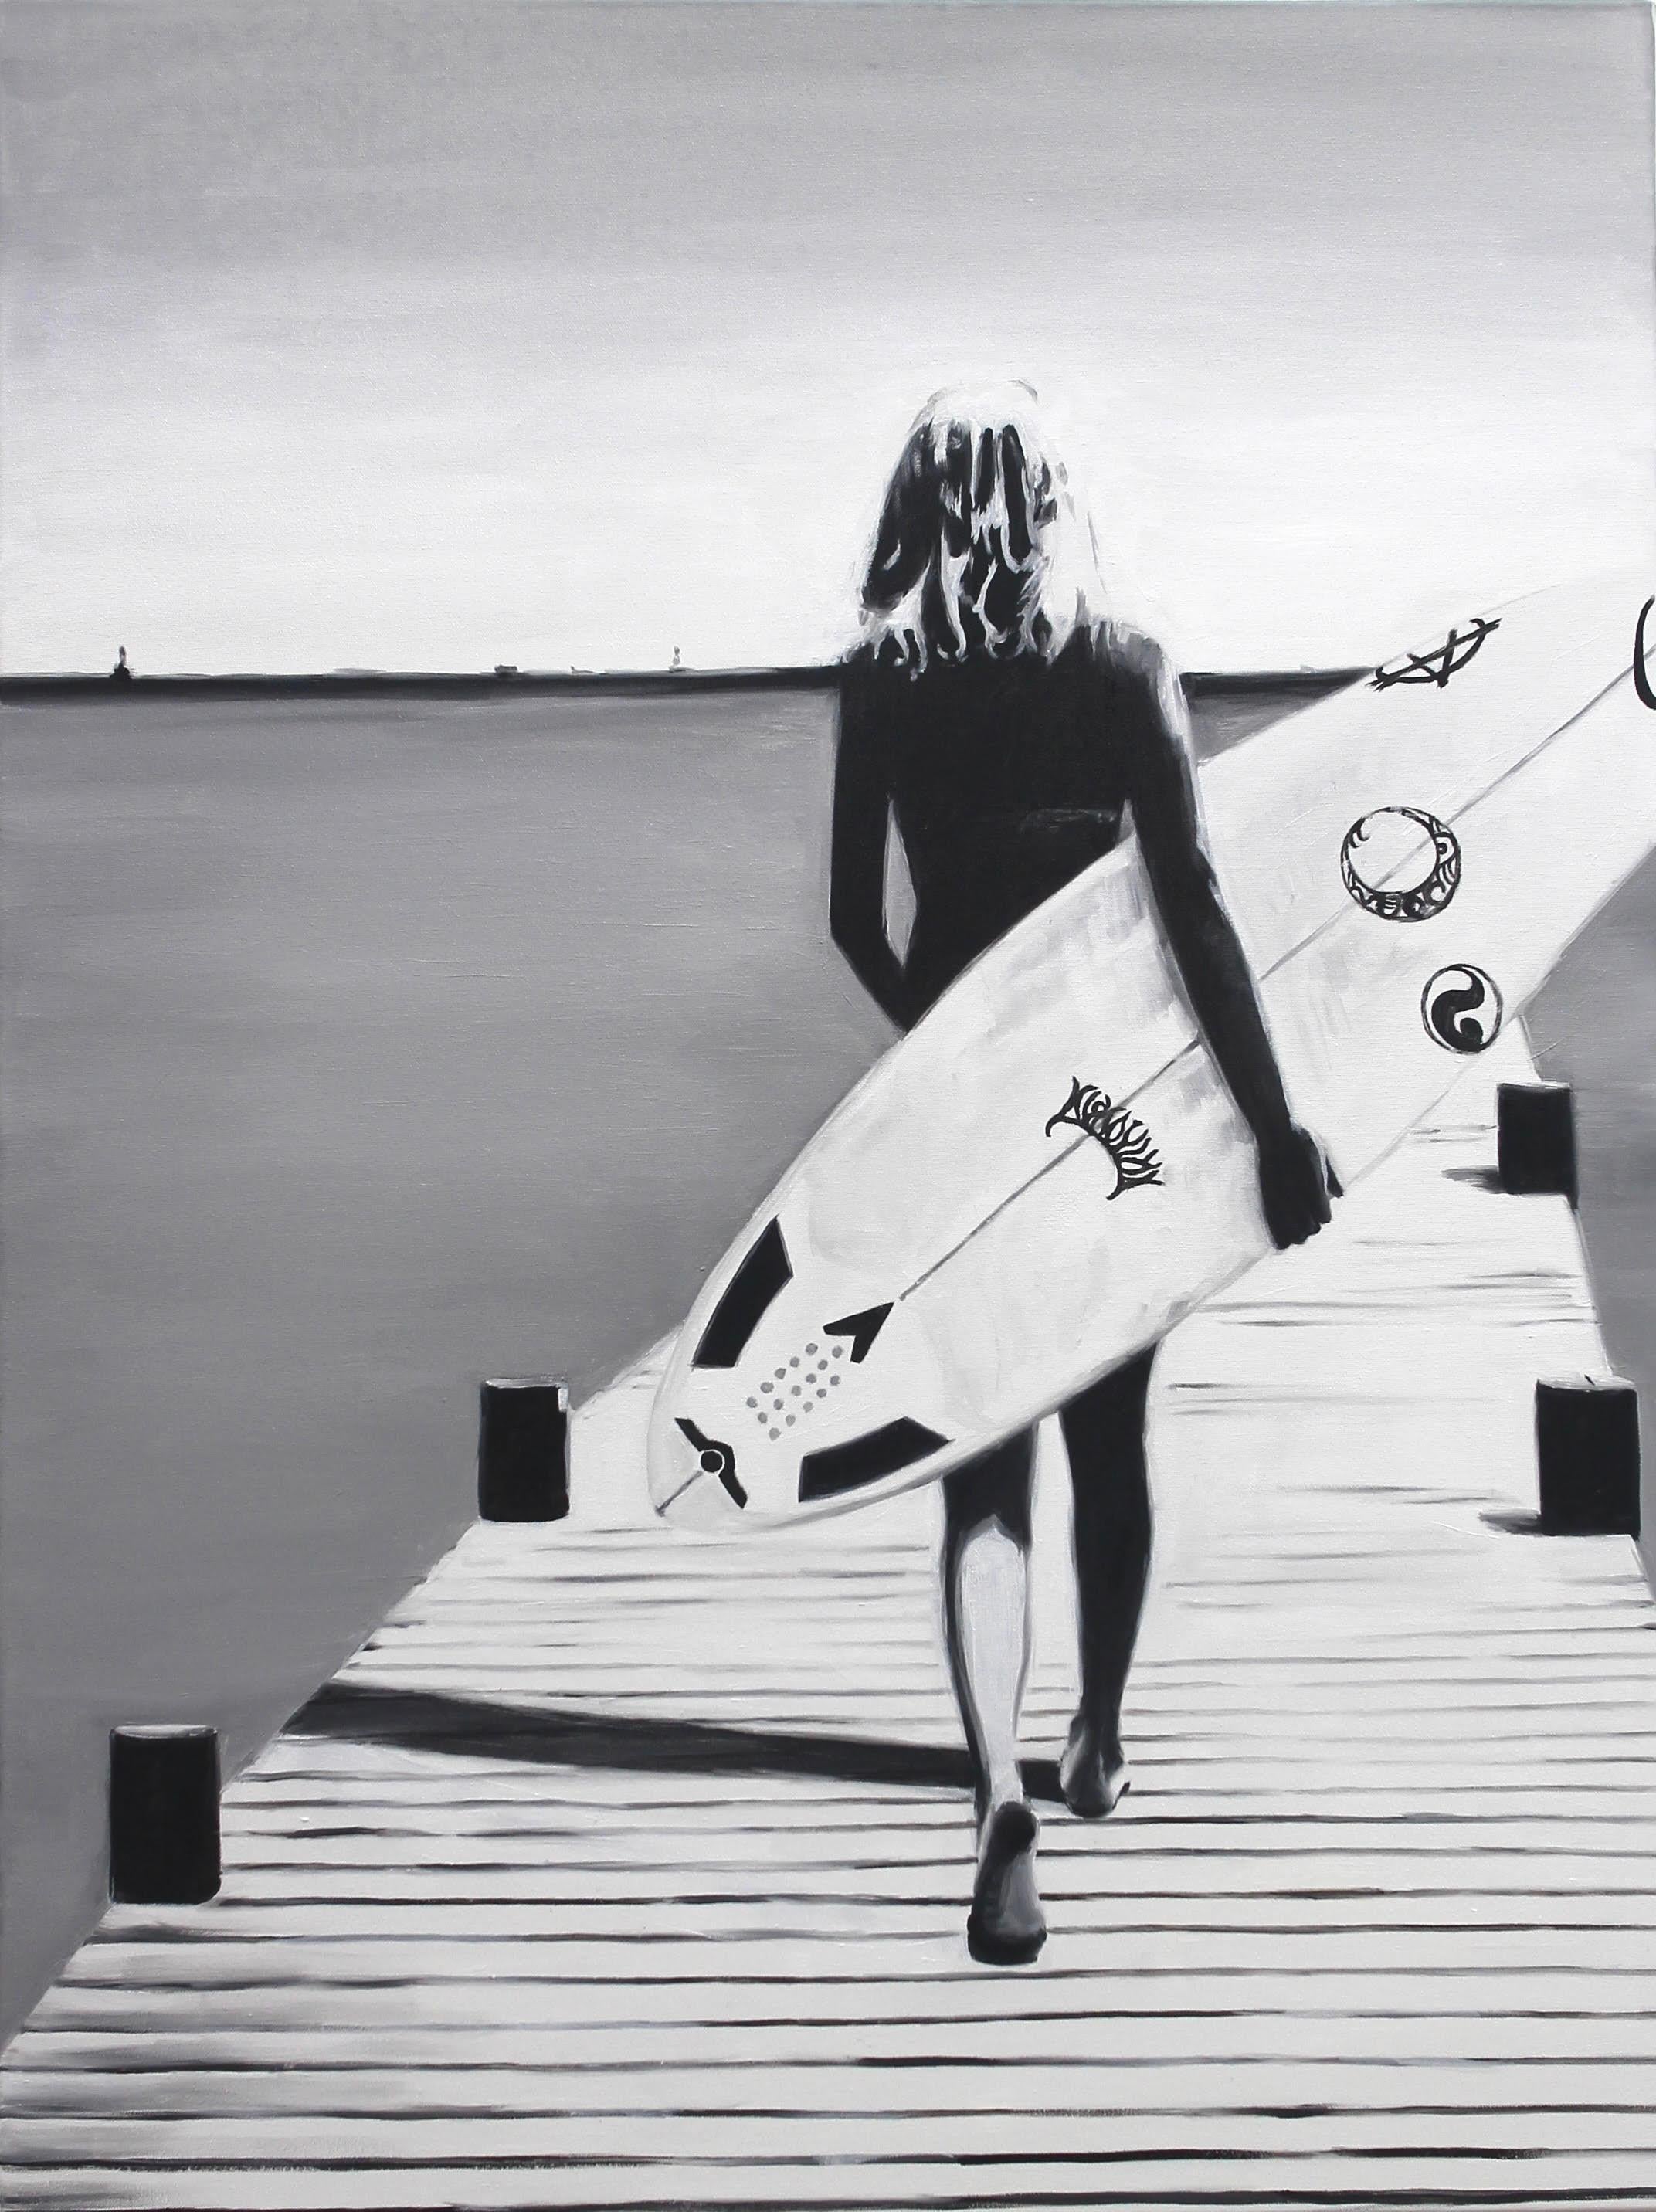 Cindy Press Figurative Painting - "On the Surface" black and white oil painting of a woman holding a surfboard